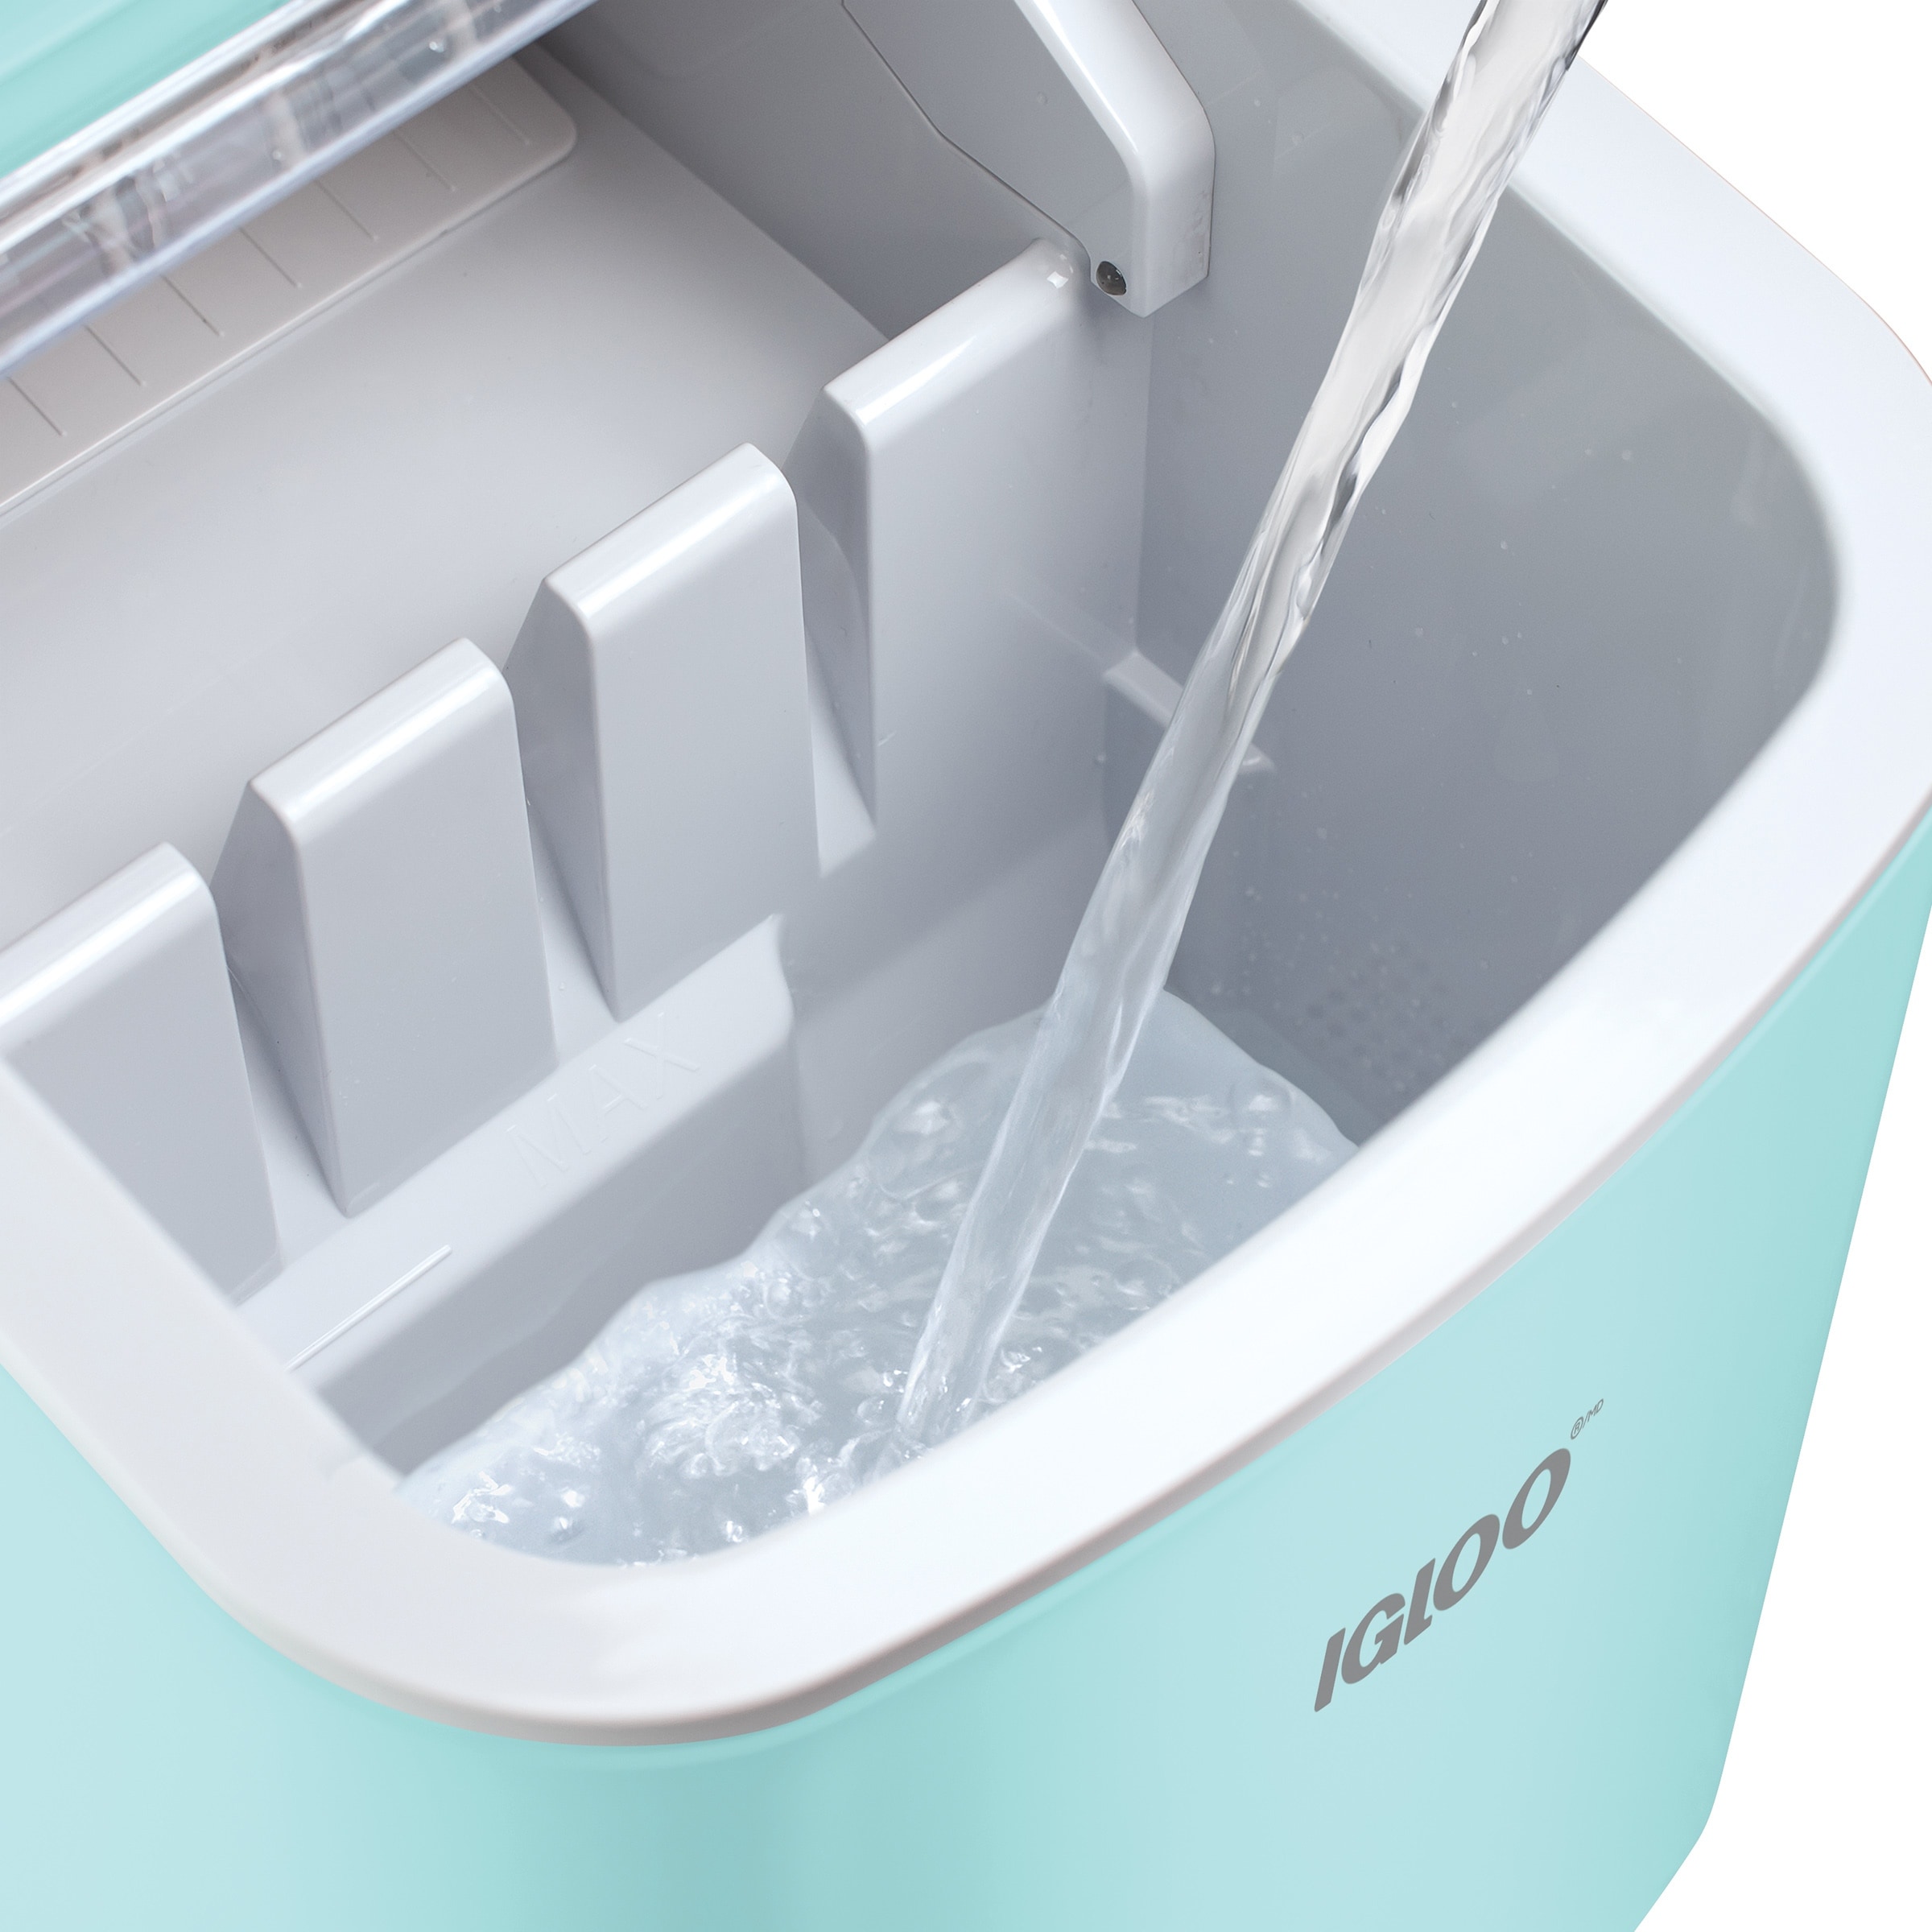 Igloo Automatic Self-Cleaning Portable Countertop Ice Maker with Handle -  Aqua, 3 pc - King Soopers